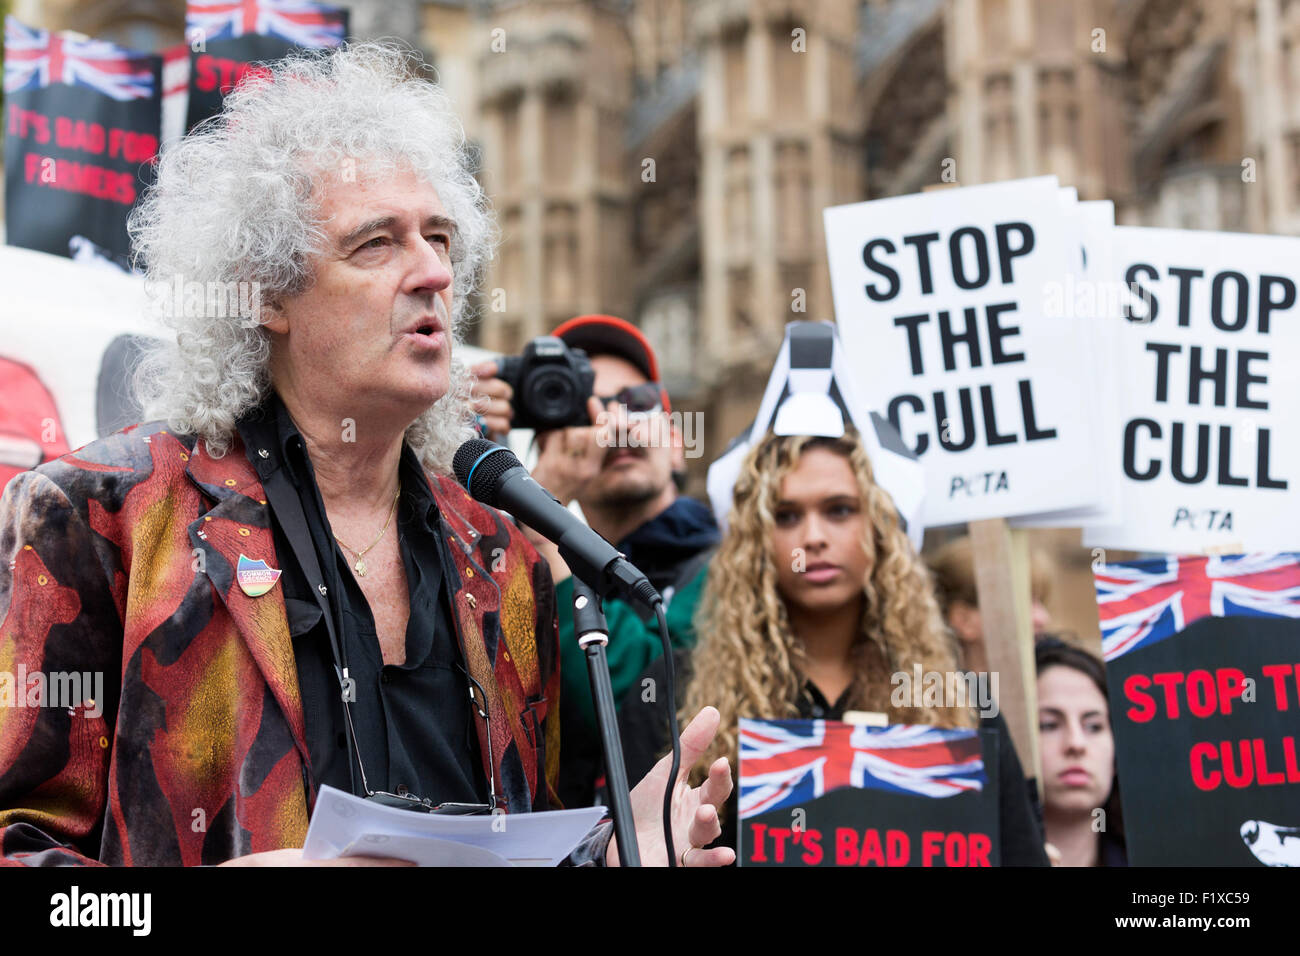 London, UK. 8th September, 2015. Dr Brian May, astrophysicist and guitarist of Queen, joins the Stop the Badger Cull protest at the Houses of Parliament. The protesters, including the animal rights organisation PETA, plan to launch legal action against the culling. Badgers are carriers of Bovine TB (Mycobacterium bovis) and thought to be responsible for spreading the disease. Photo: Vibrant Pictures/Alamy LIve News Stock Photo